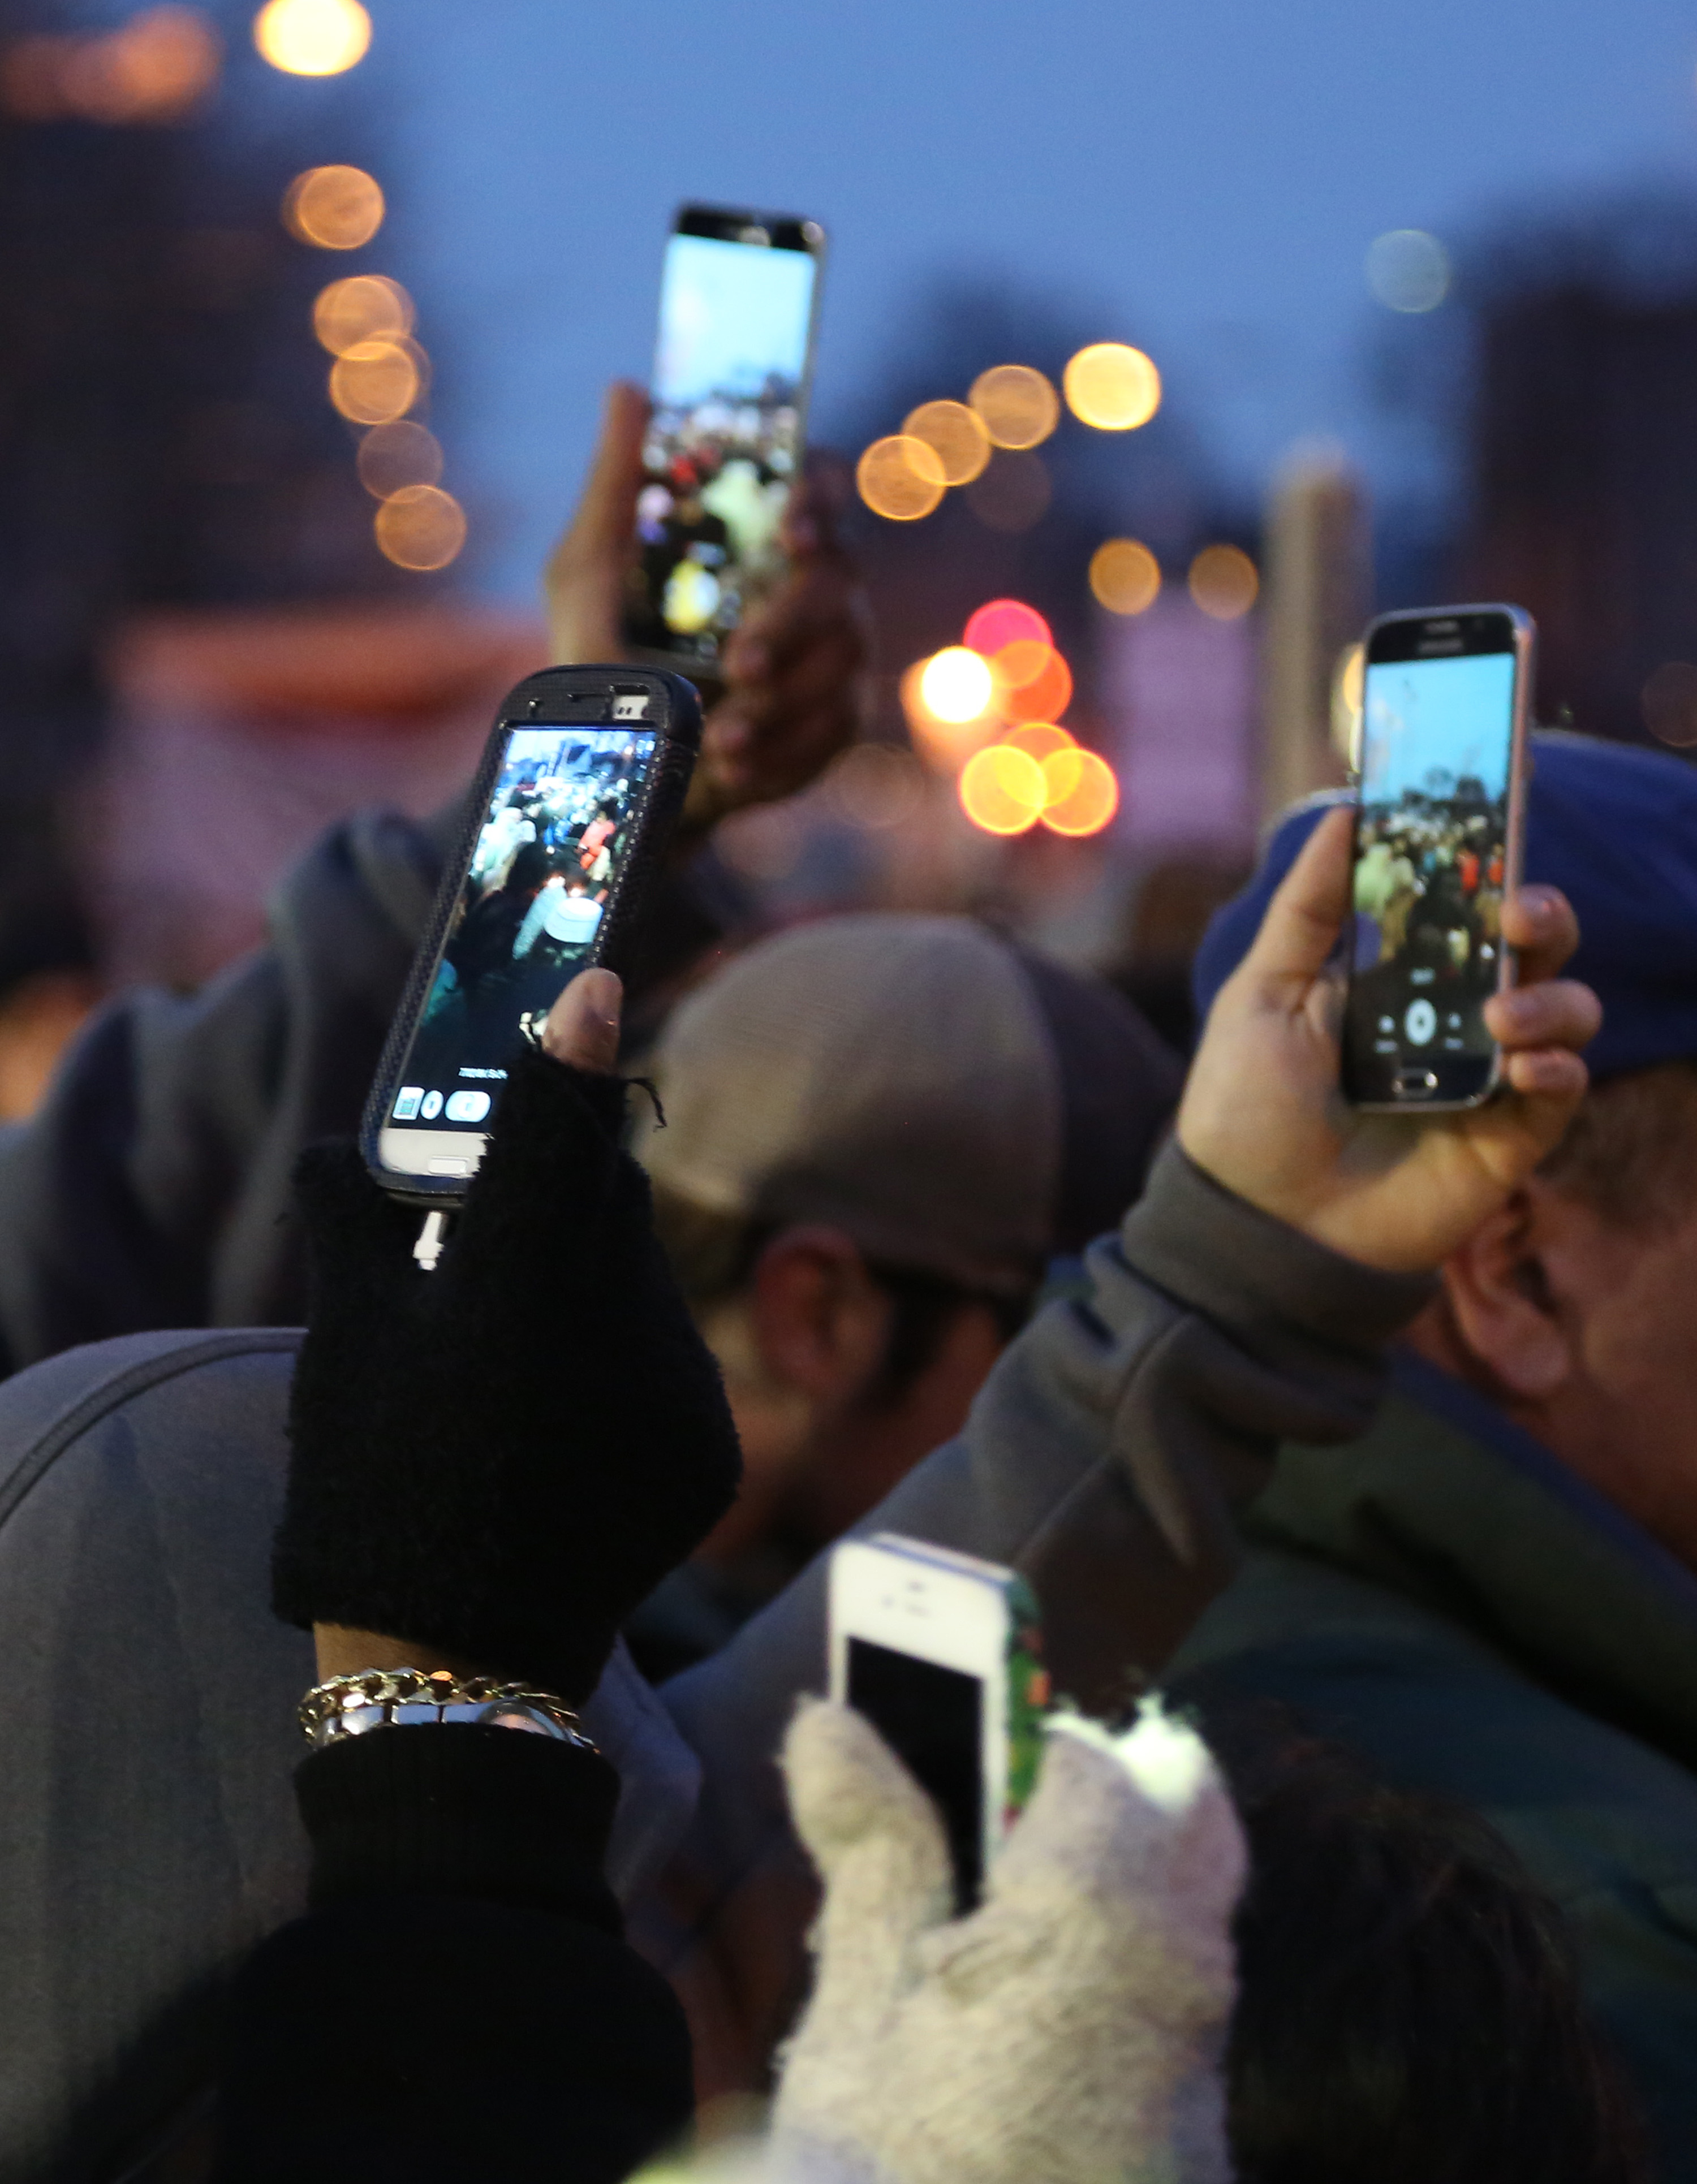 Crowd members held up cellphones as lights in honor of Jamar Clark during a vigil held in front of the Minneapolis Fourth Precinct. ] (KYNDELL HARKNESS/STAR TRIBUNE) kyndell.harkness@startribune.com Protesters in front of Minneapolis Fourth Precinct in Minneapolis Min., Friday November 20, 2015.